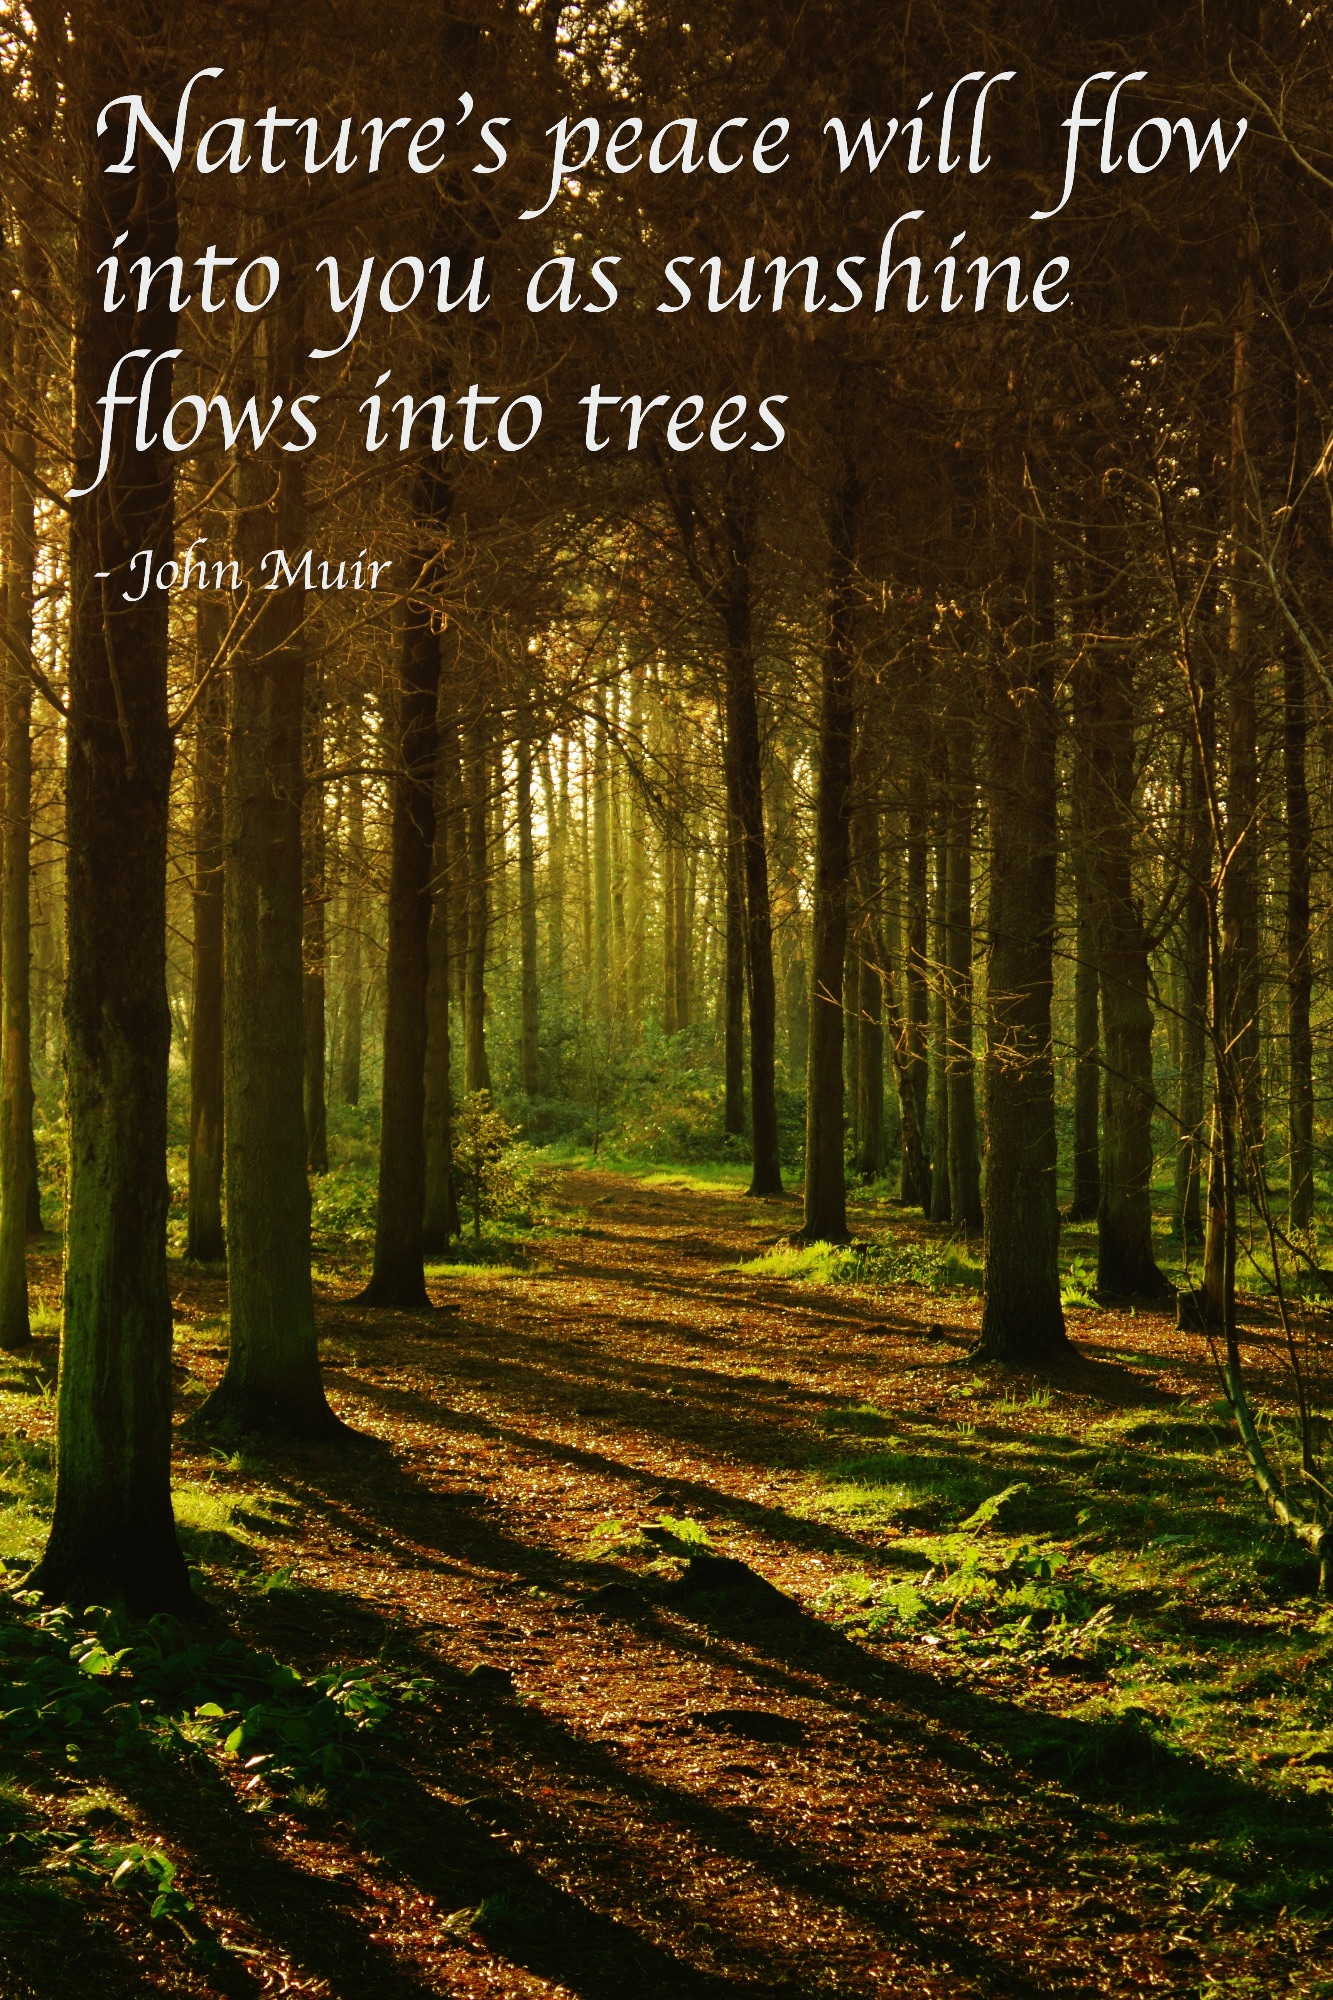 John Muir quote Natures peace will flow into you copy